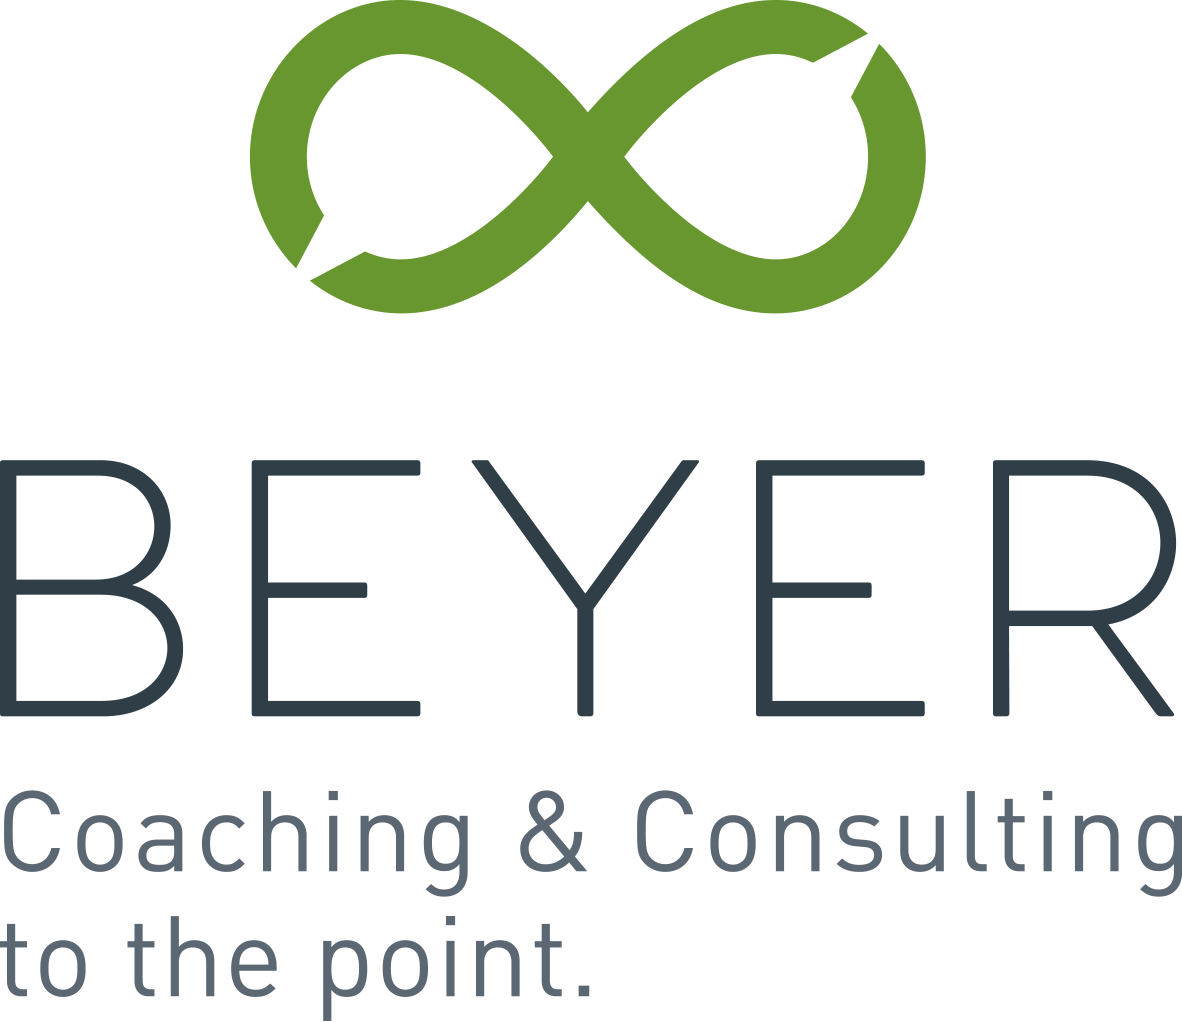 BEYER-Coaching-Consulting